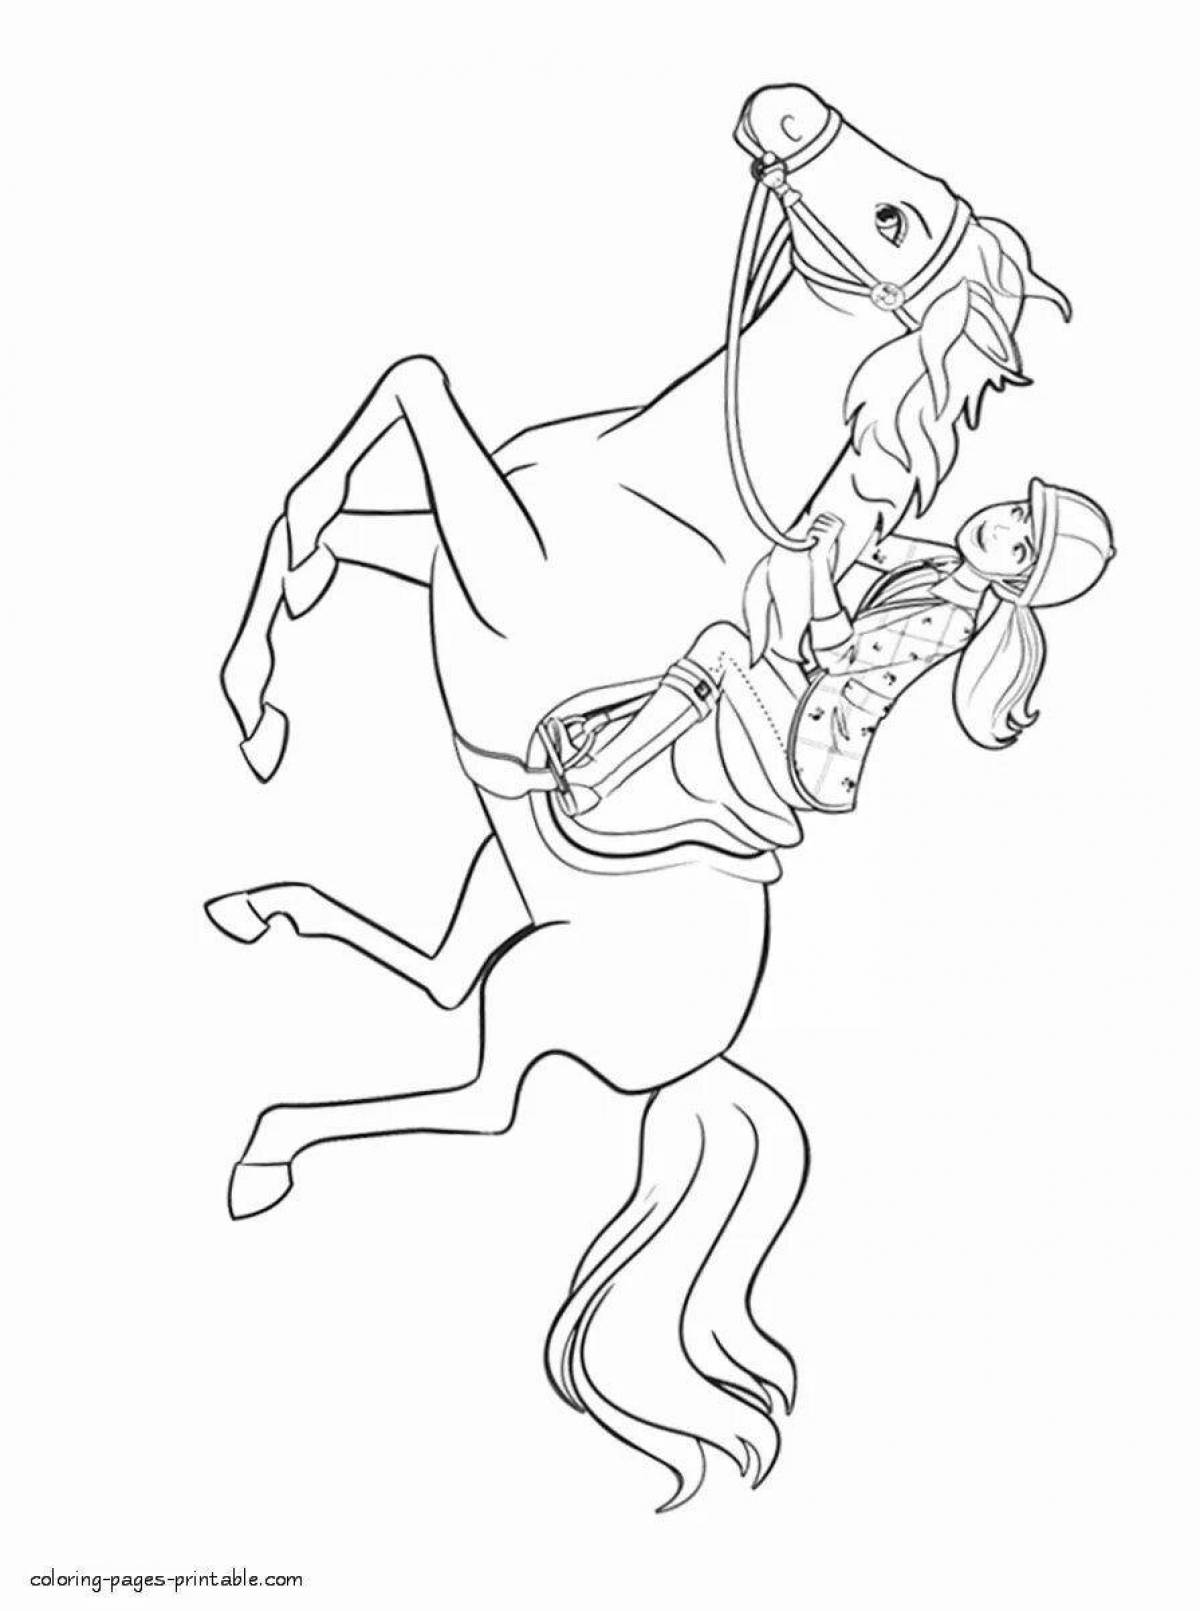 Coloring page majestic barbie on a horse